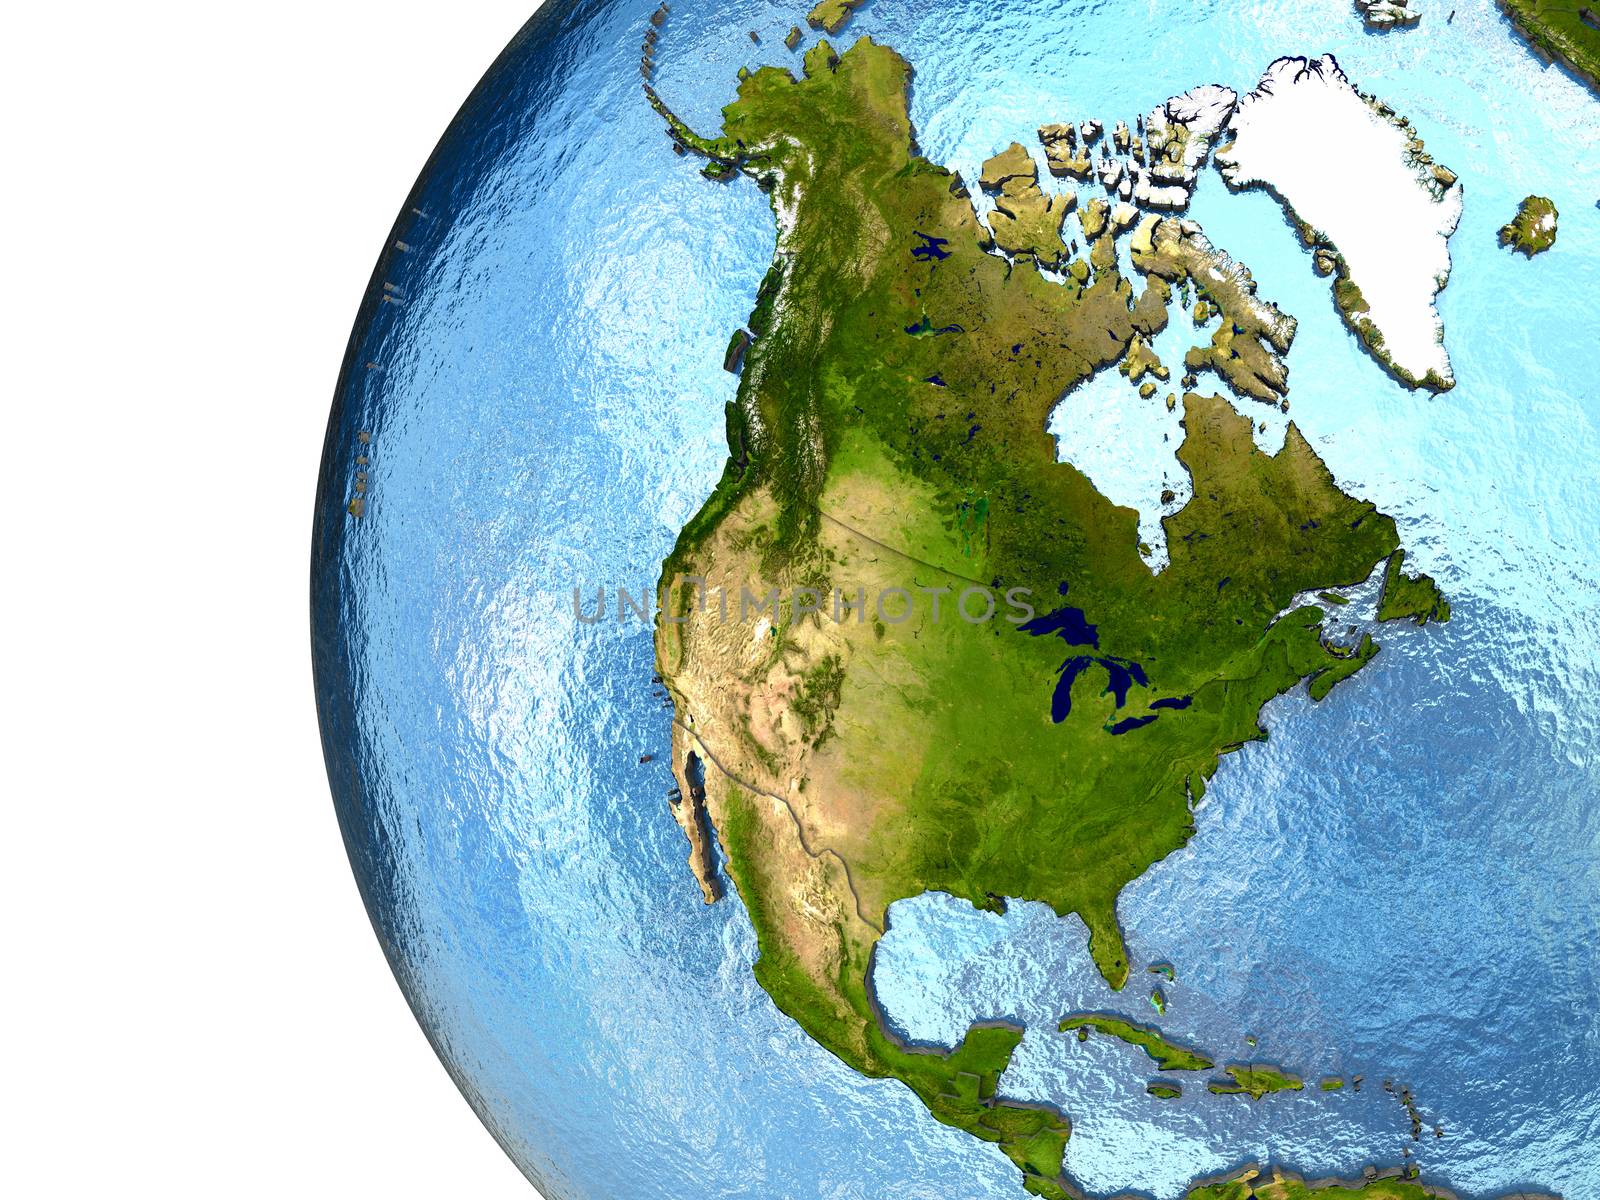 North America on Earth by Harvepino